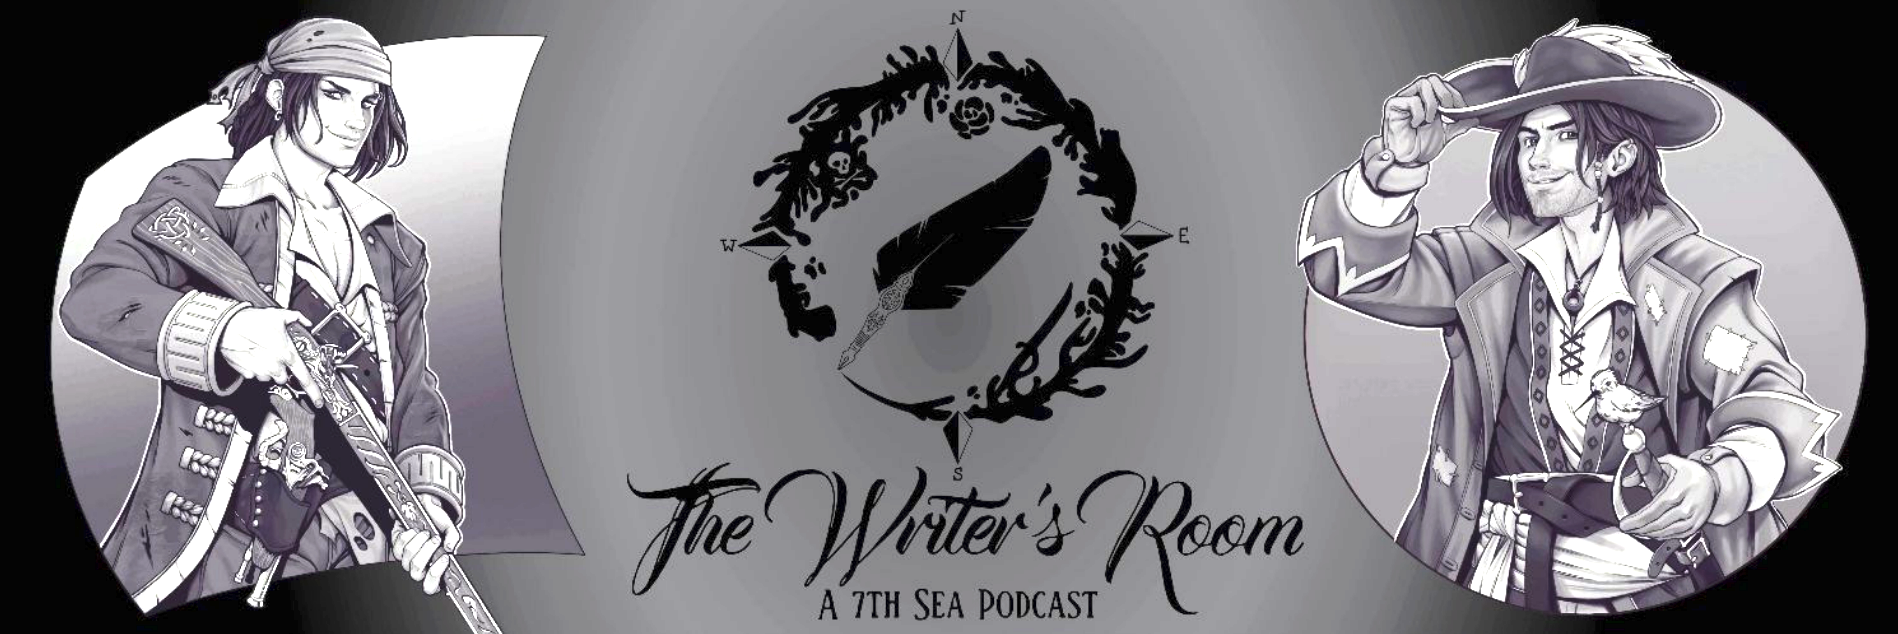 The Writer's Room - 7th Sea